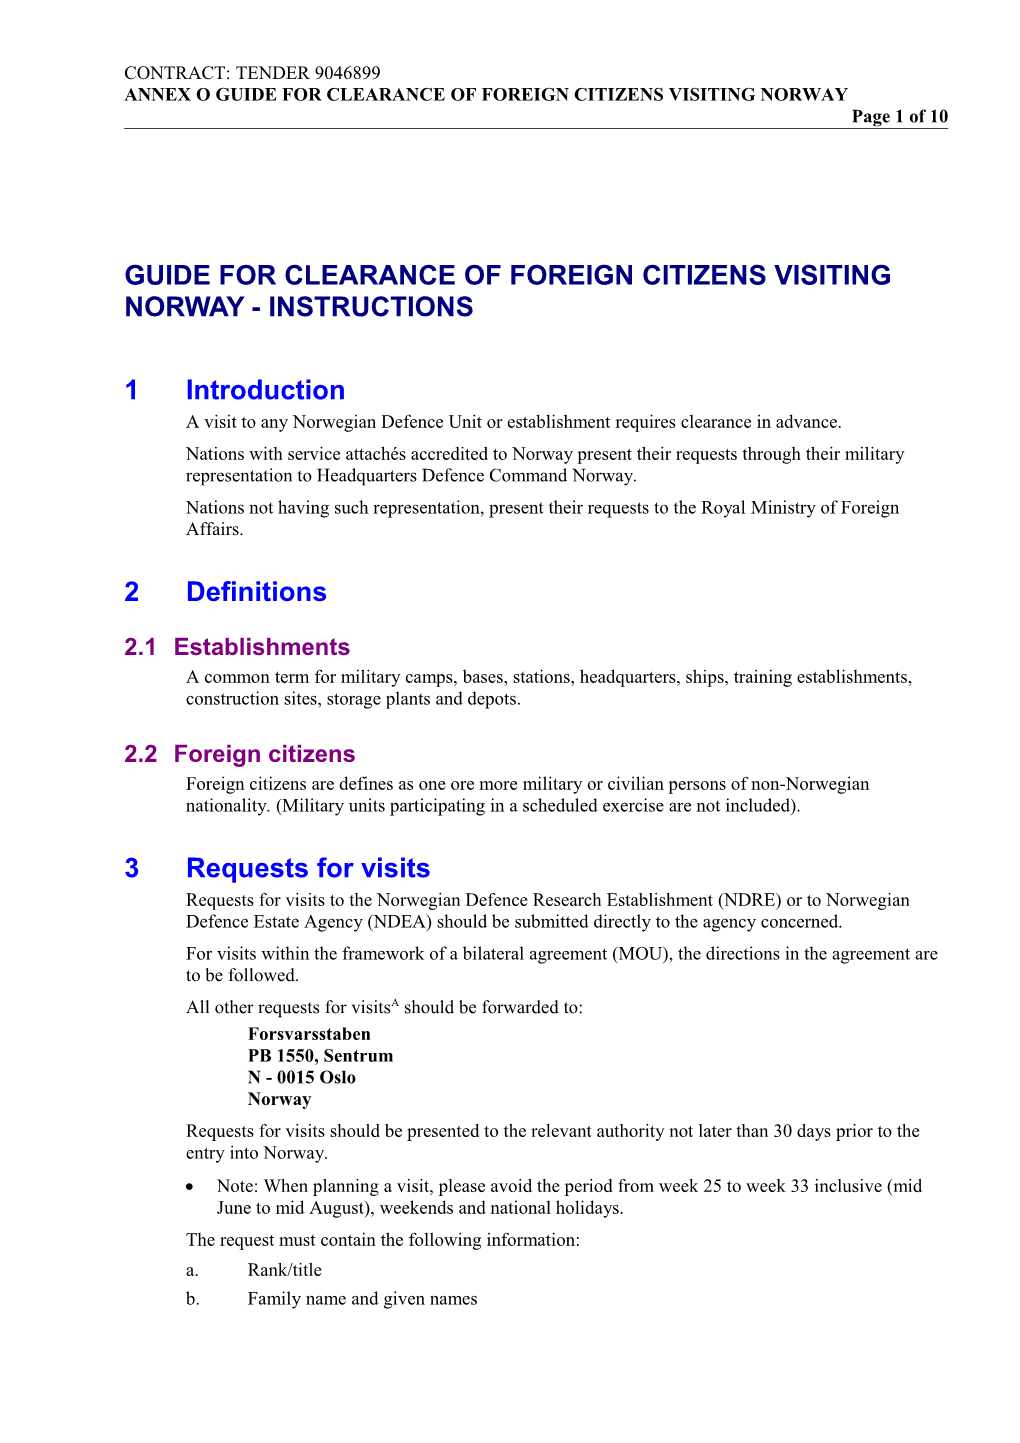 Guide for Clearance of Foreign Citizens